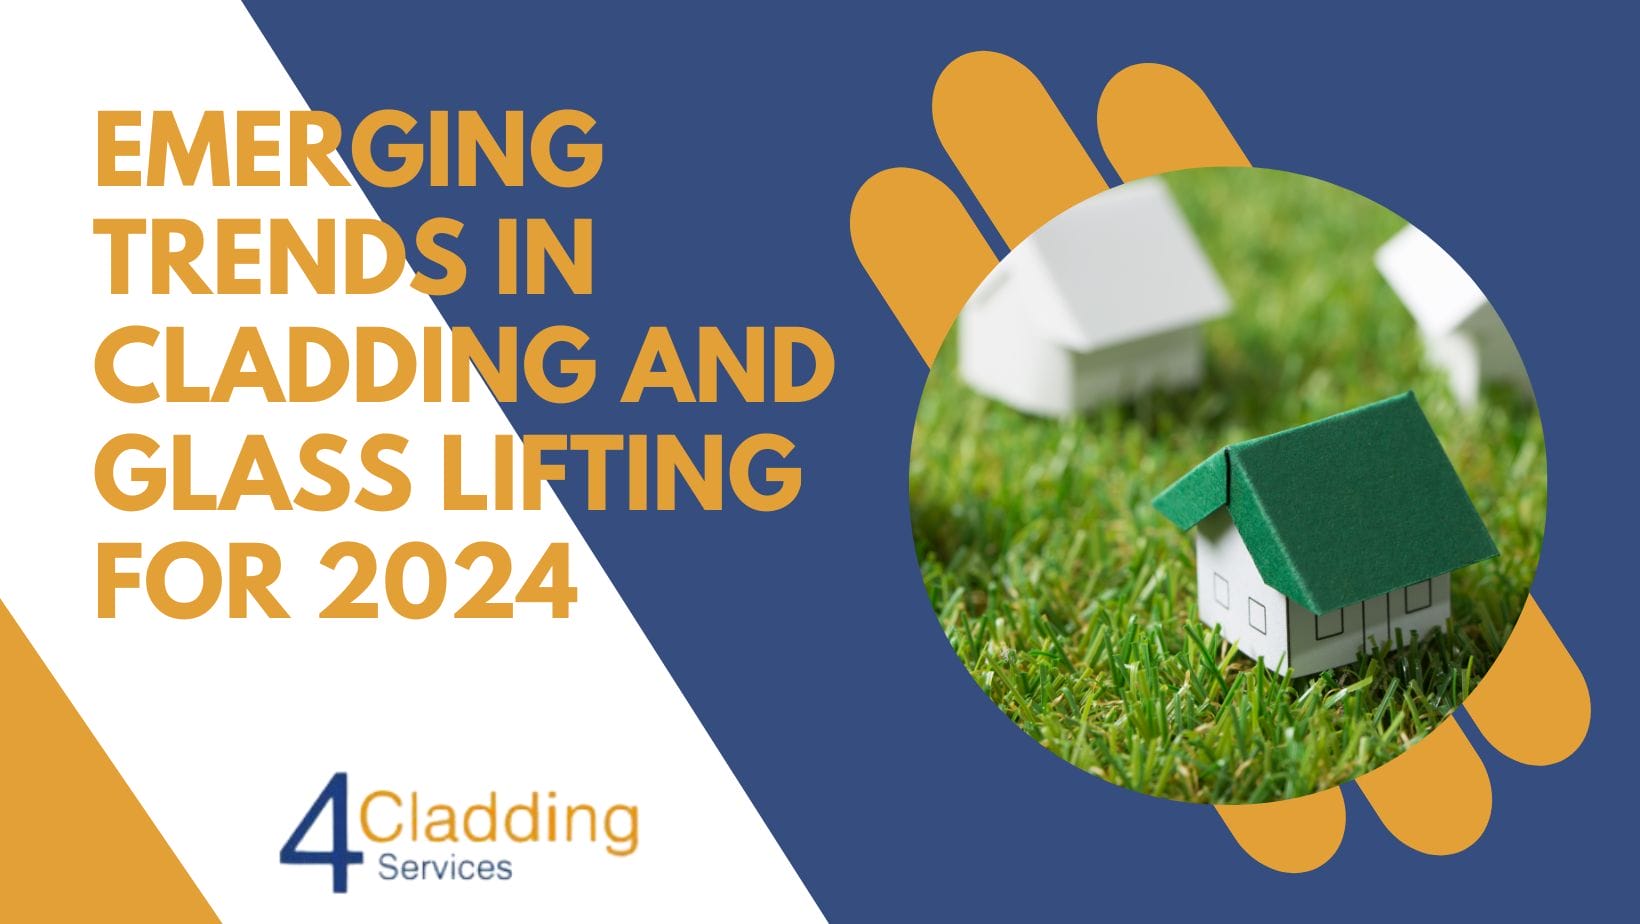 Emerging Trends in Cladding and Glass Lifting for 2024